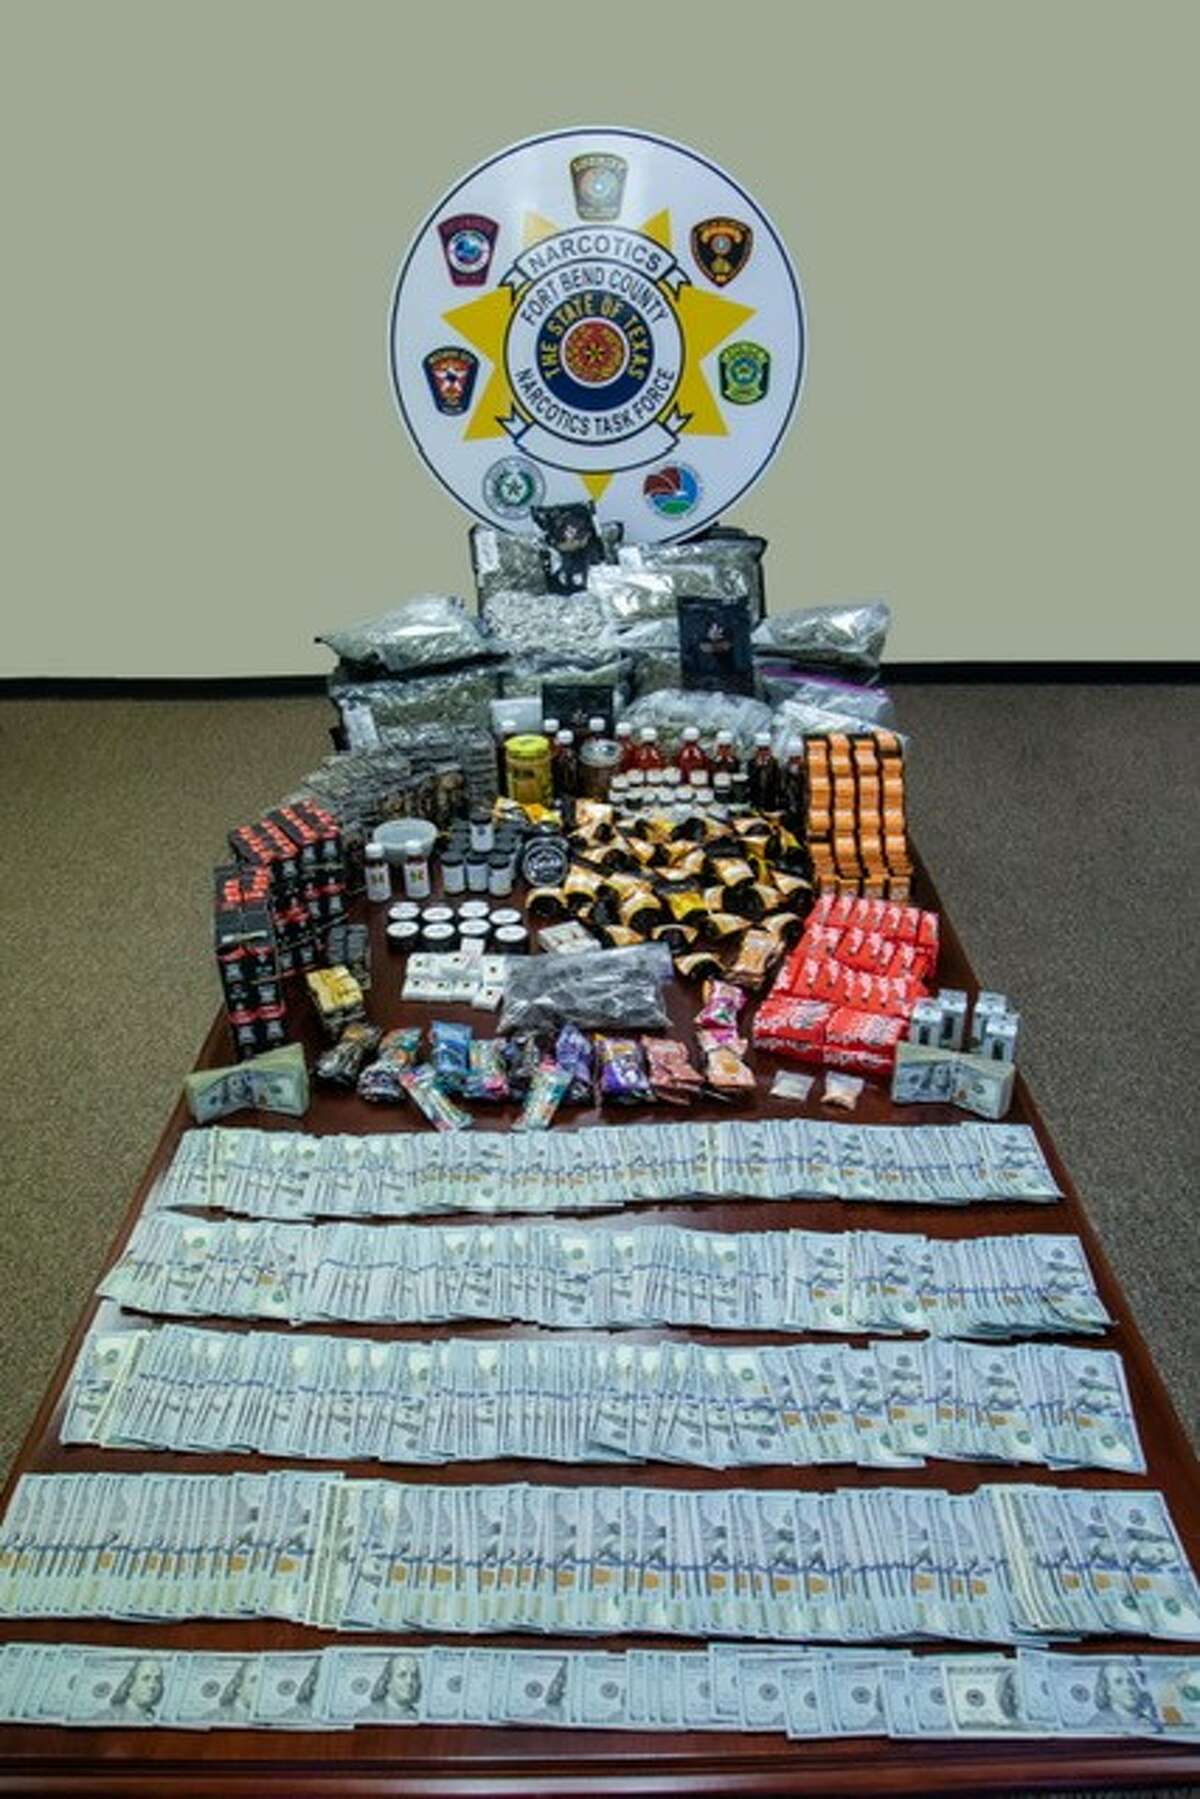 The Fort Bend County Sheriff's Office shows off a haul of drugs, paraphernalia and money seized during a recent drug bust.